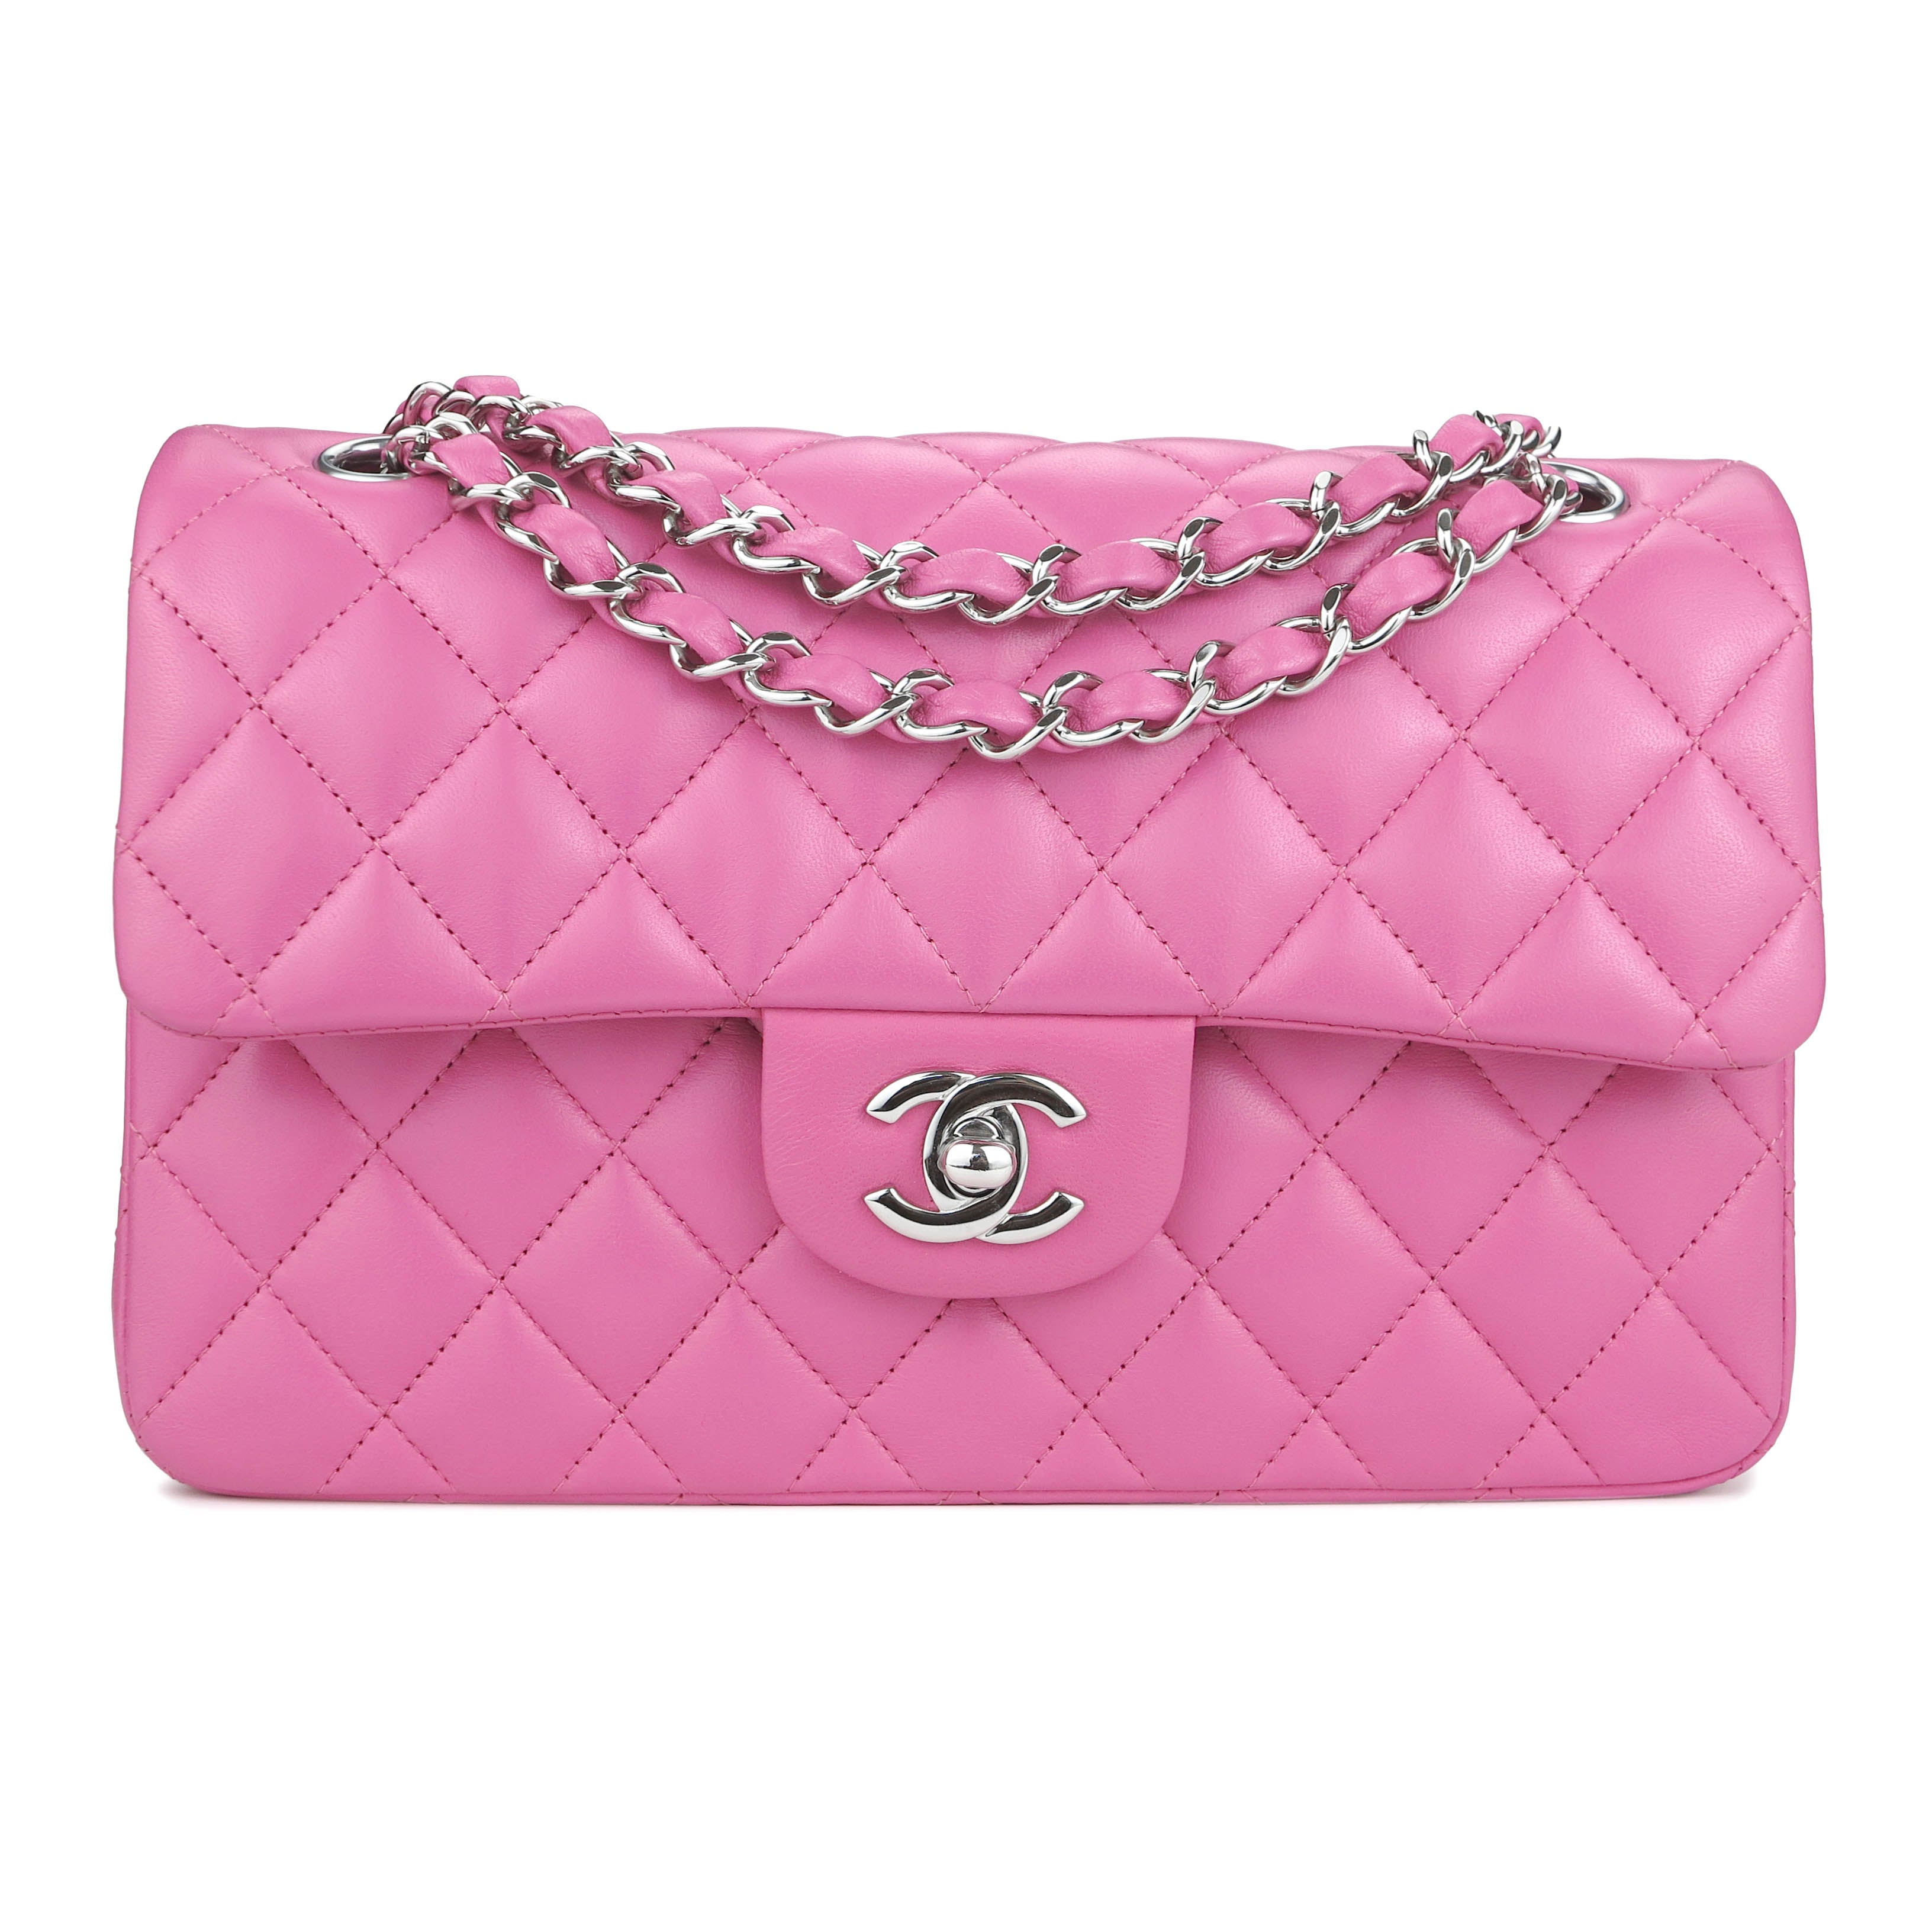 Small Classic Double Flap Bag in Barbie Pink Lambskin